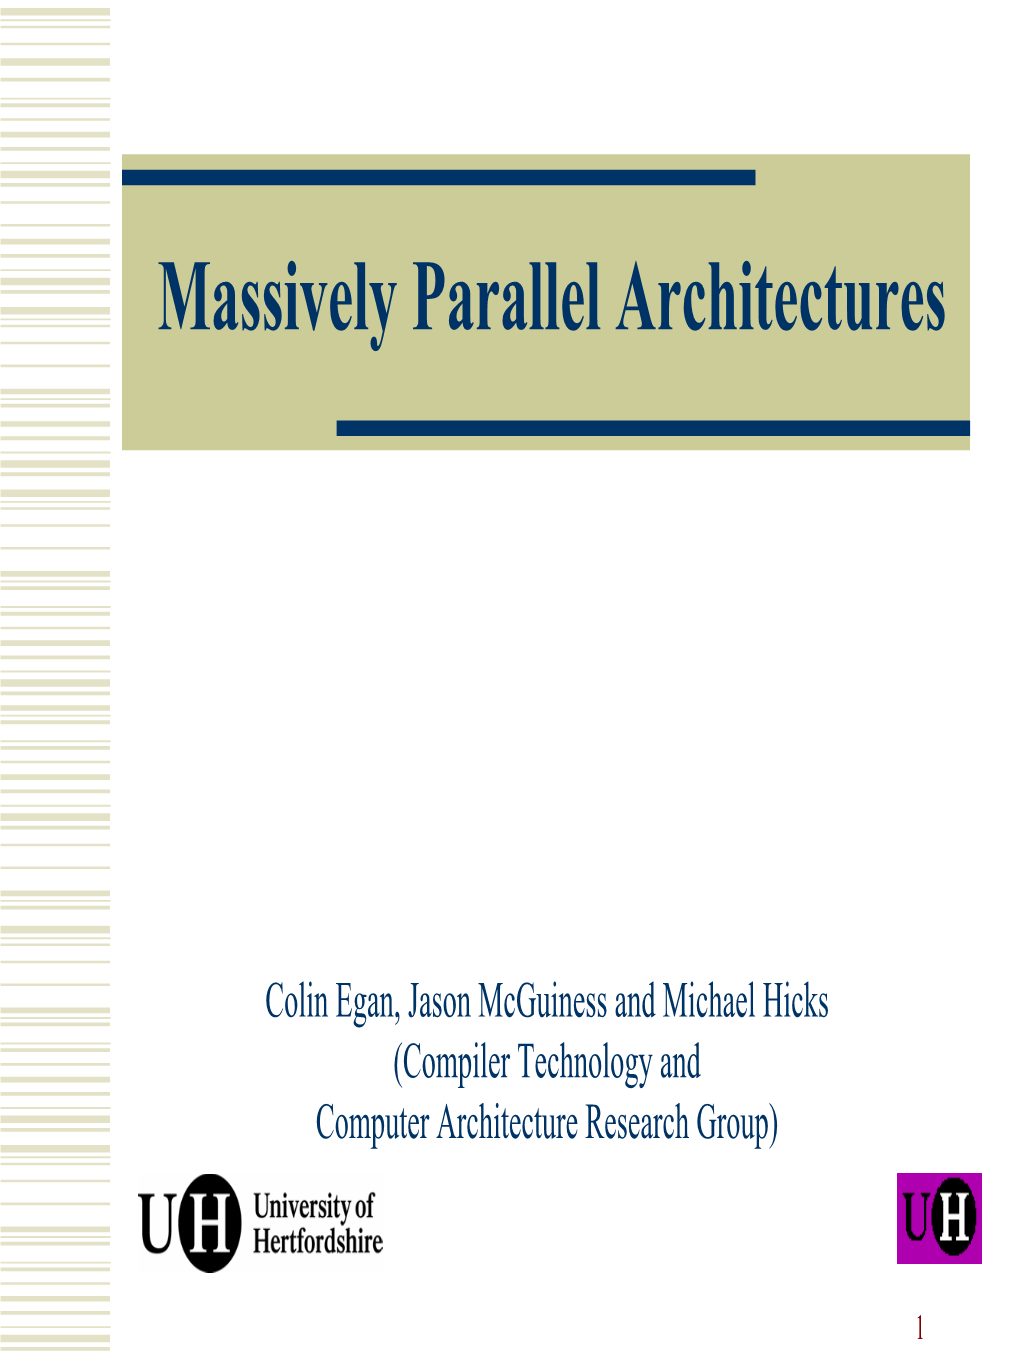 Massively Parallel Architectures